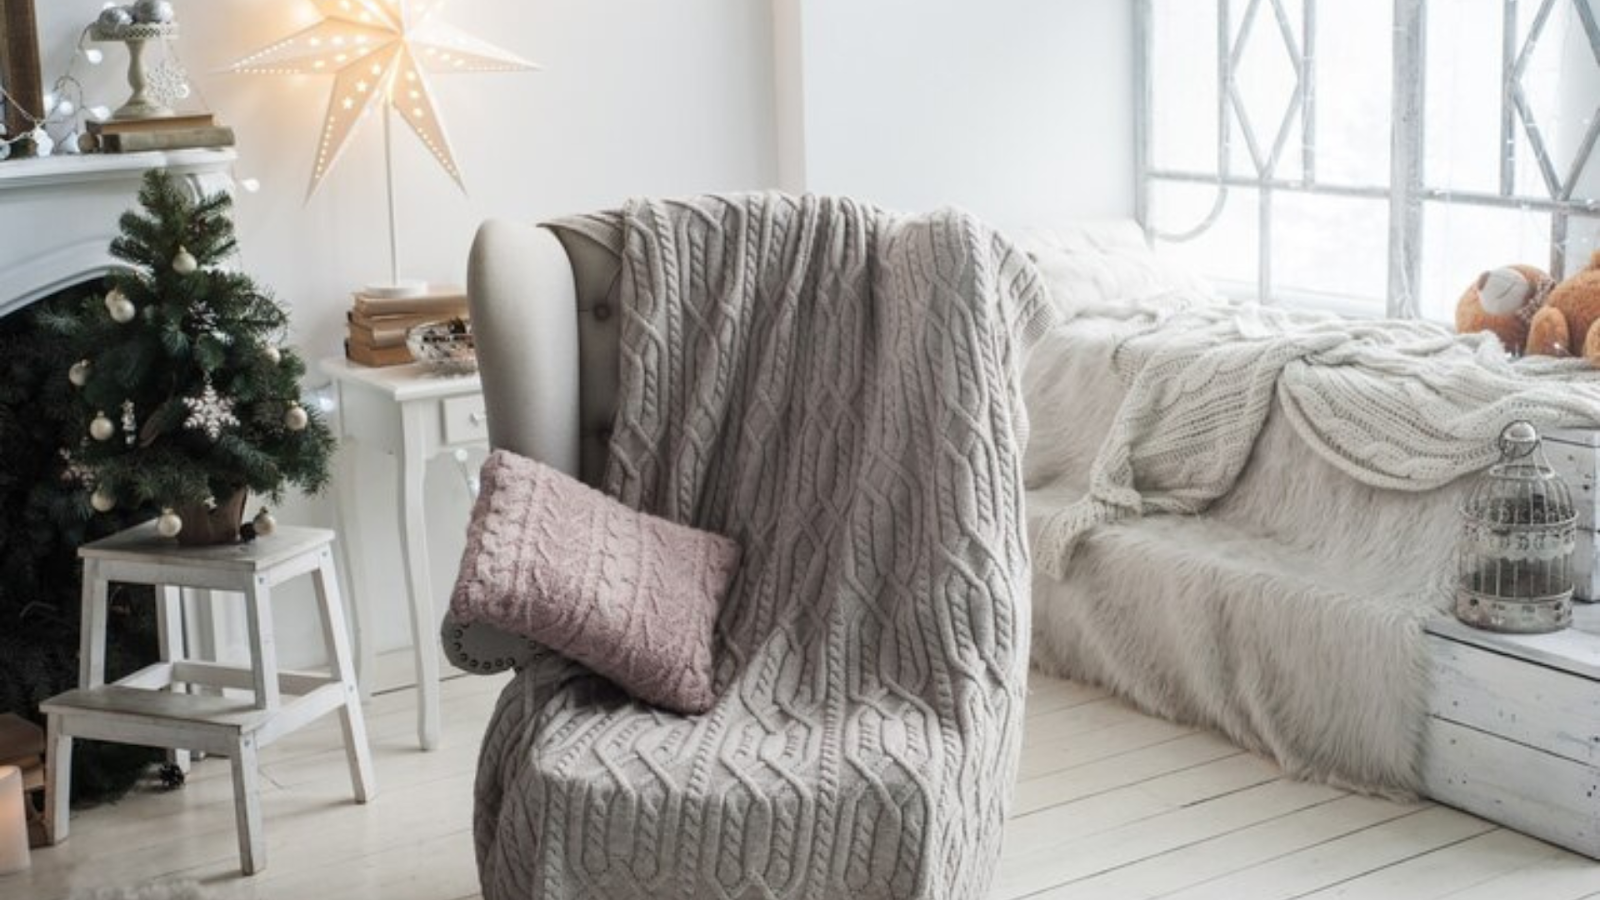 Elevate your winter home decor item vibes with snug furniture – coziness redefines.